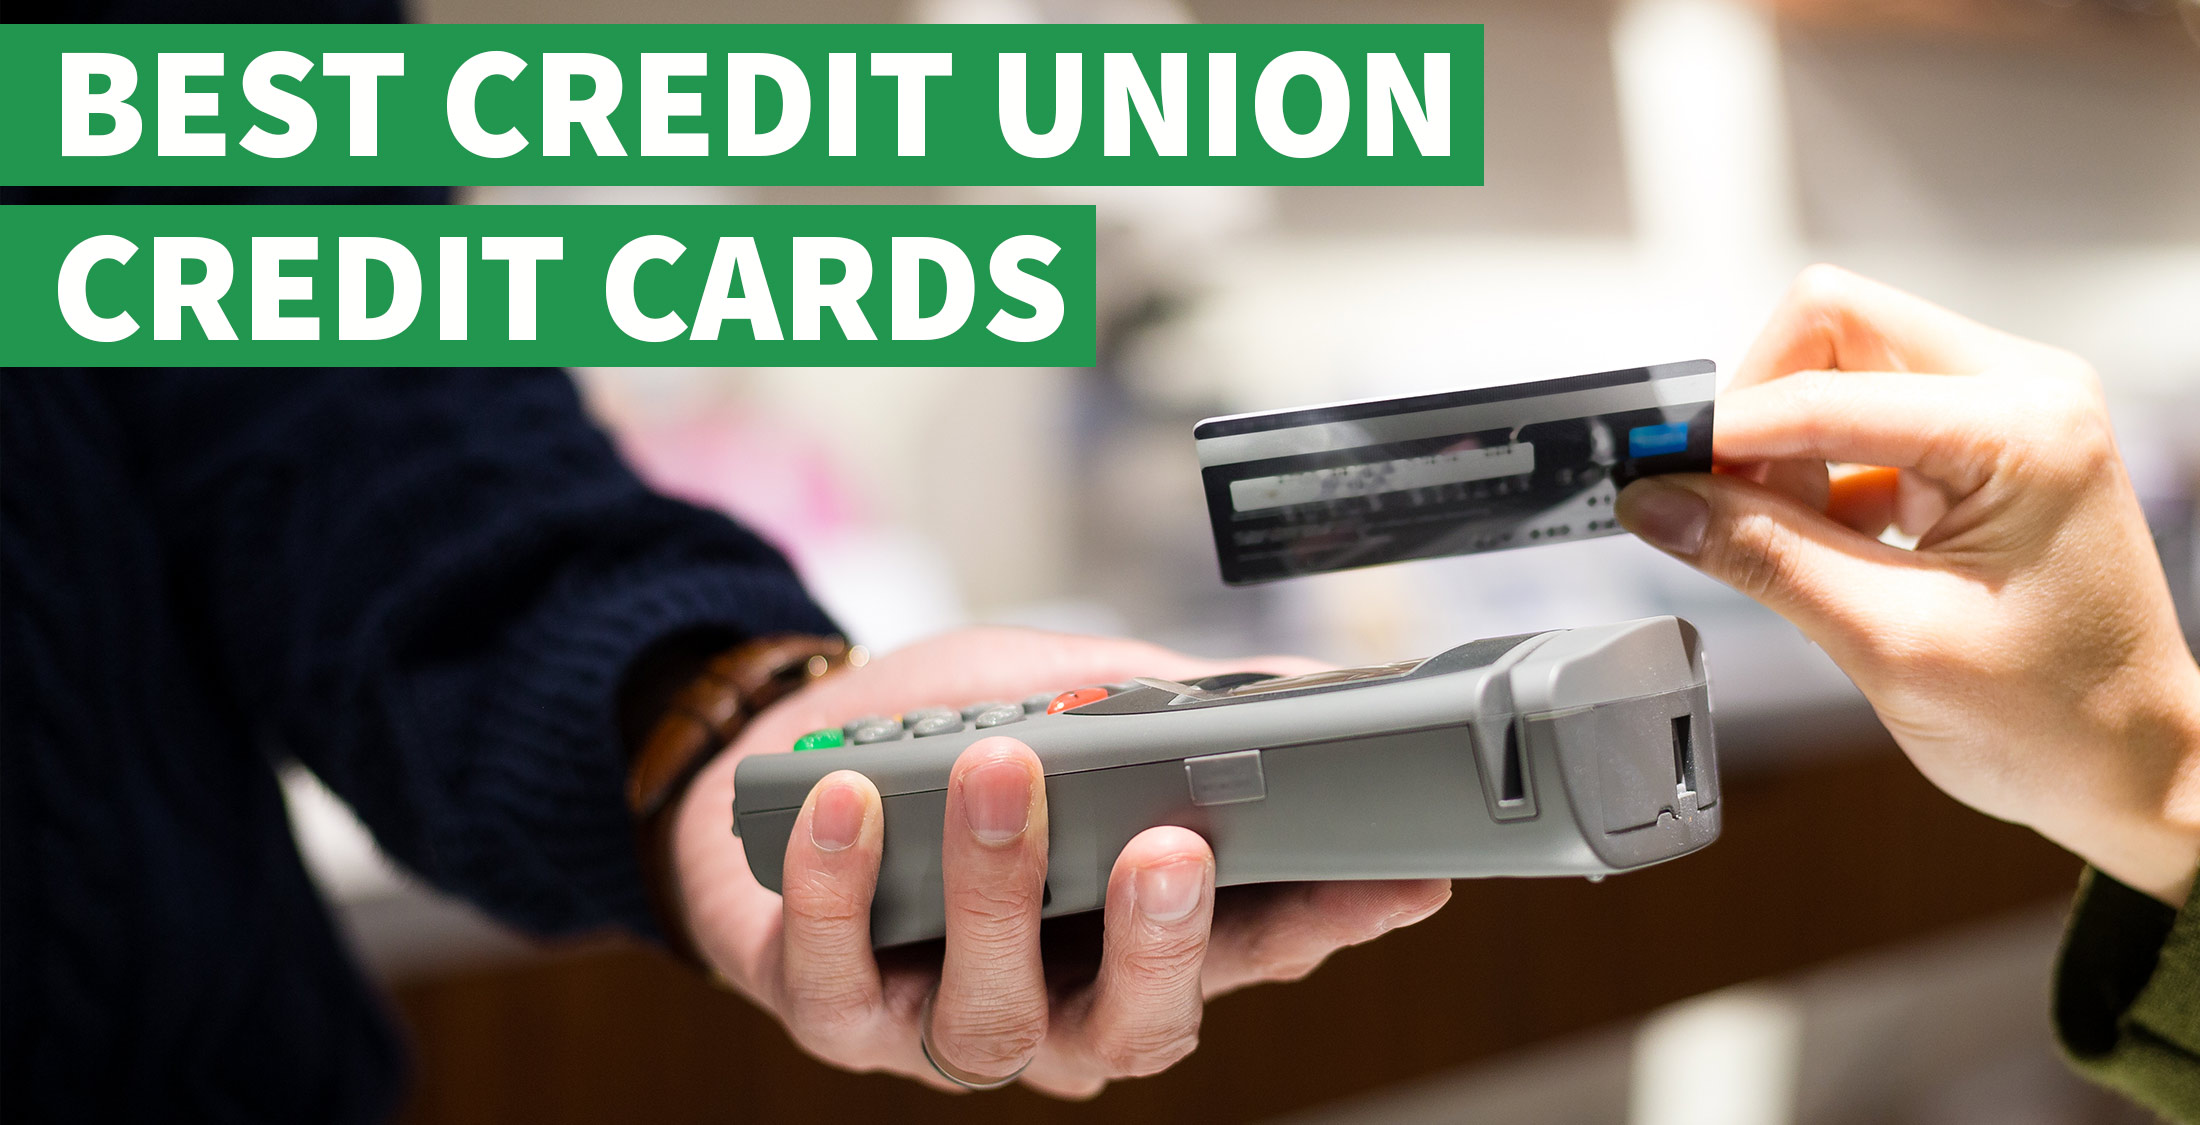 How can you open a Union Plus credit card account?